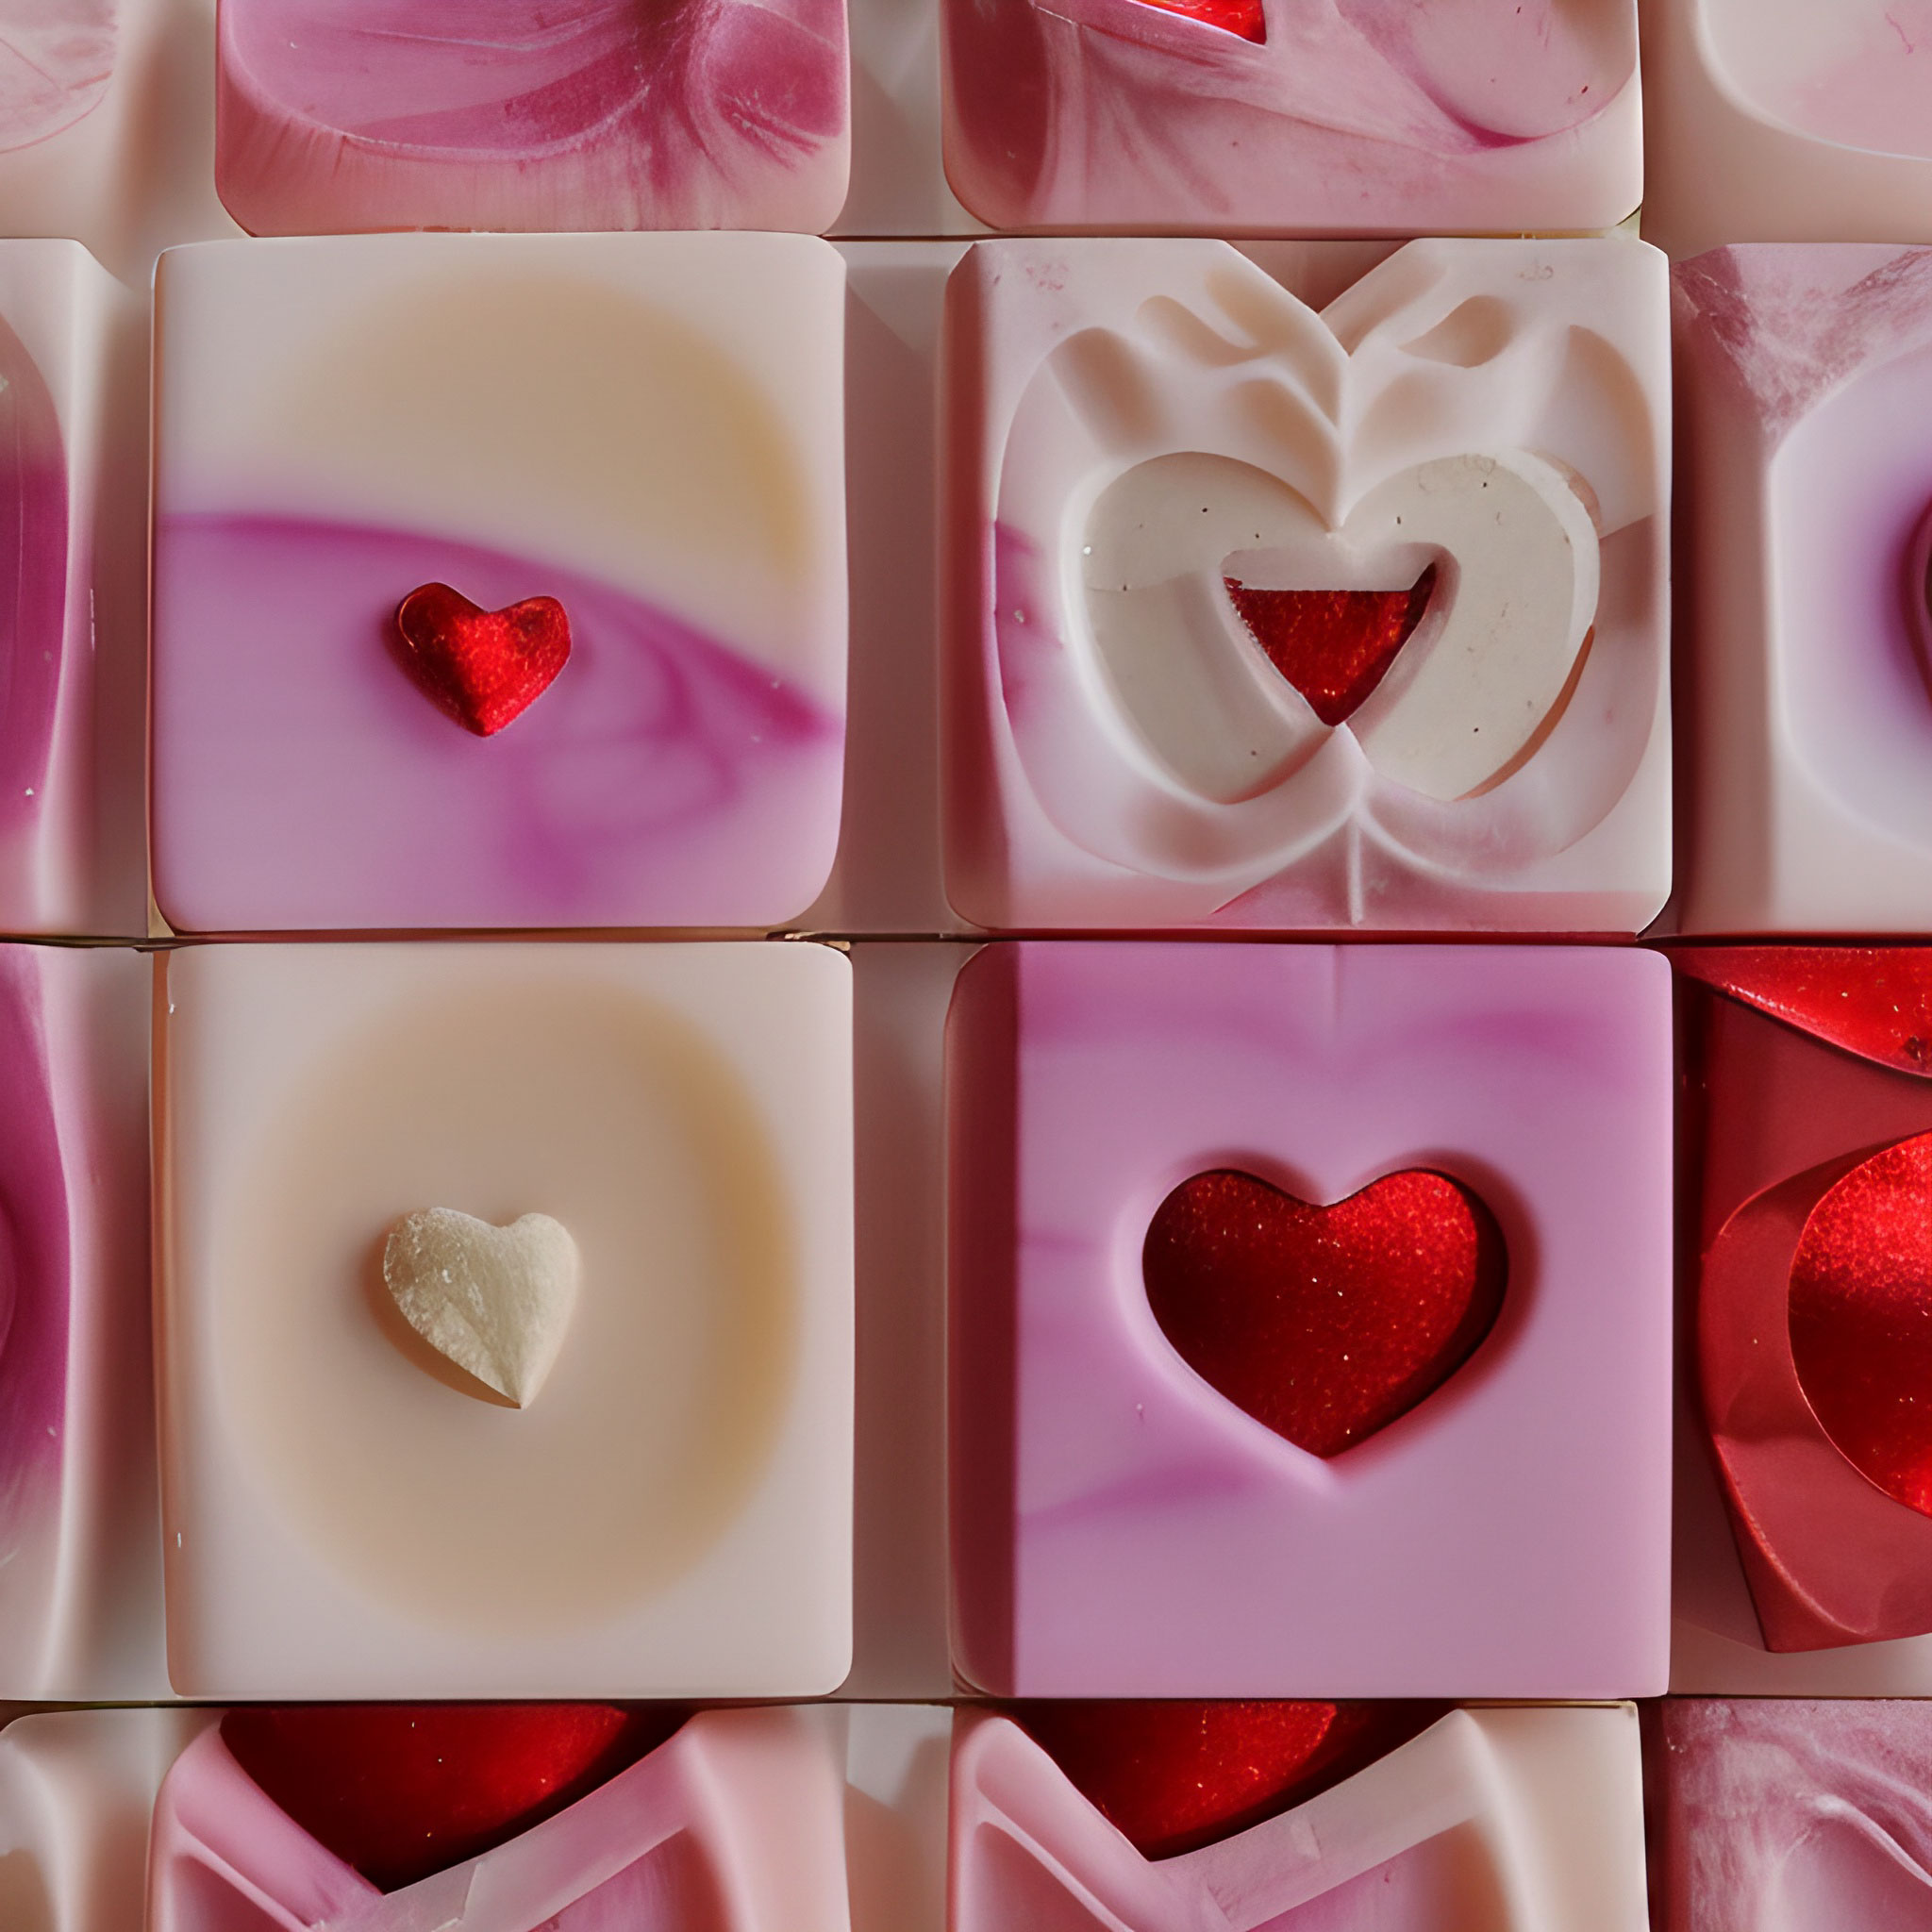 handmade soap mix with happy heart motif in pink and cream to show love for Valentine's Day